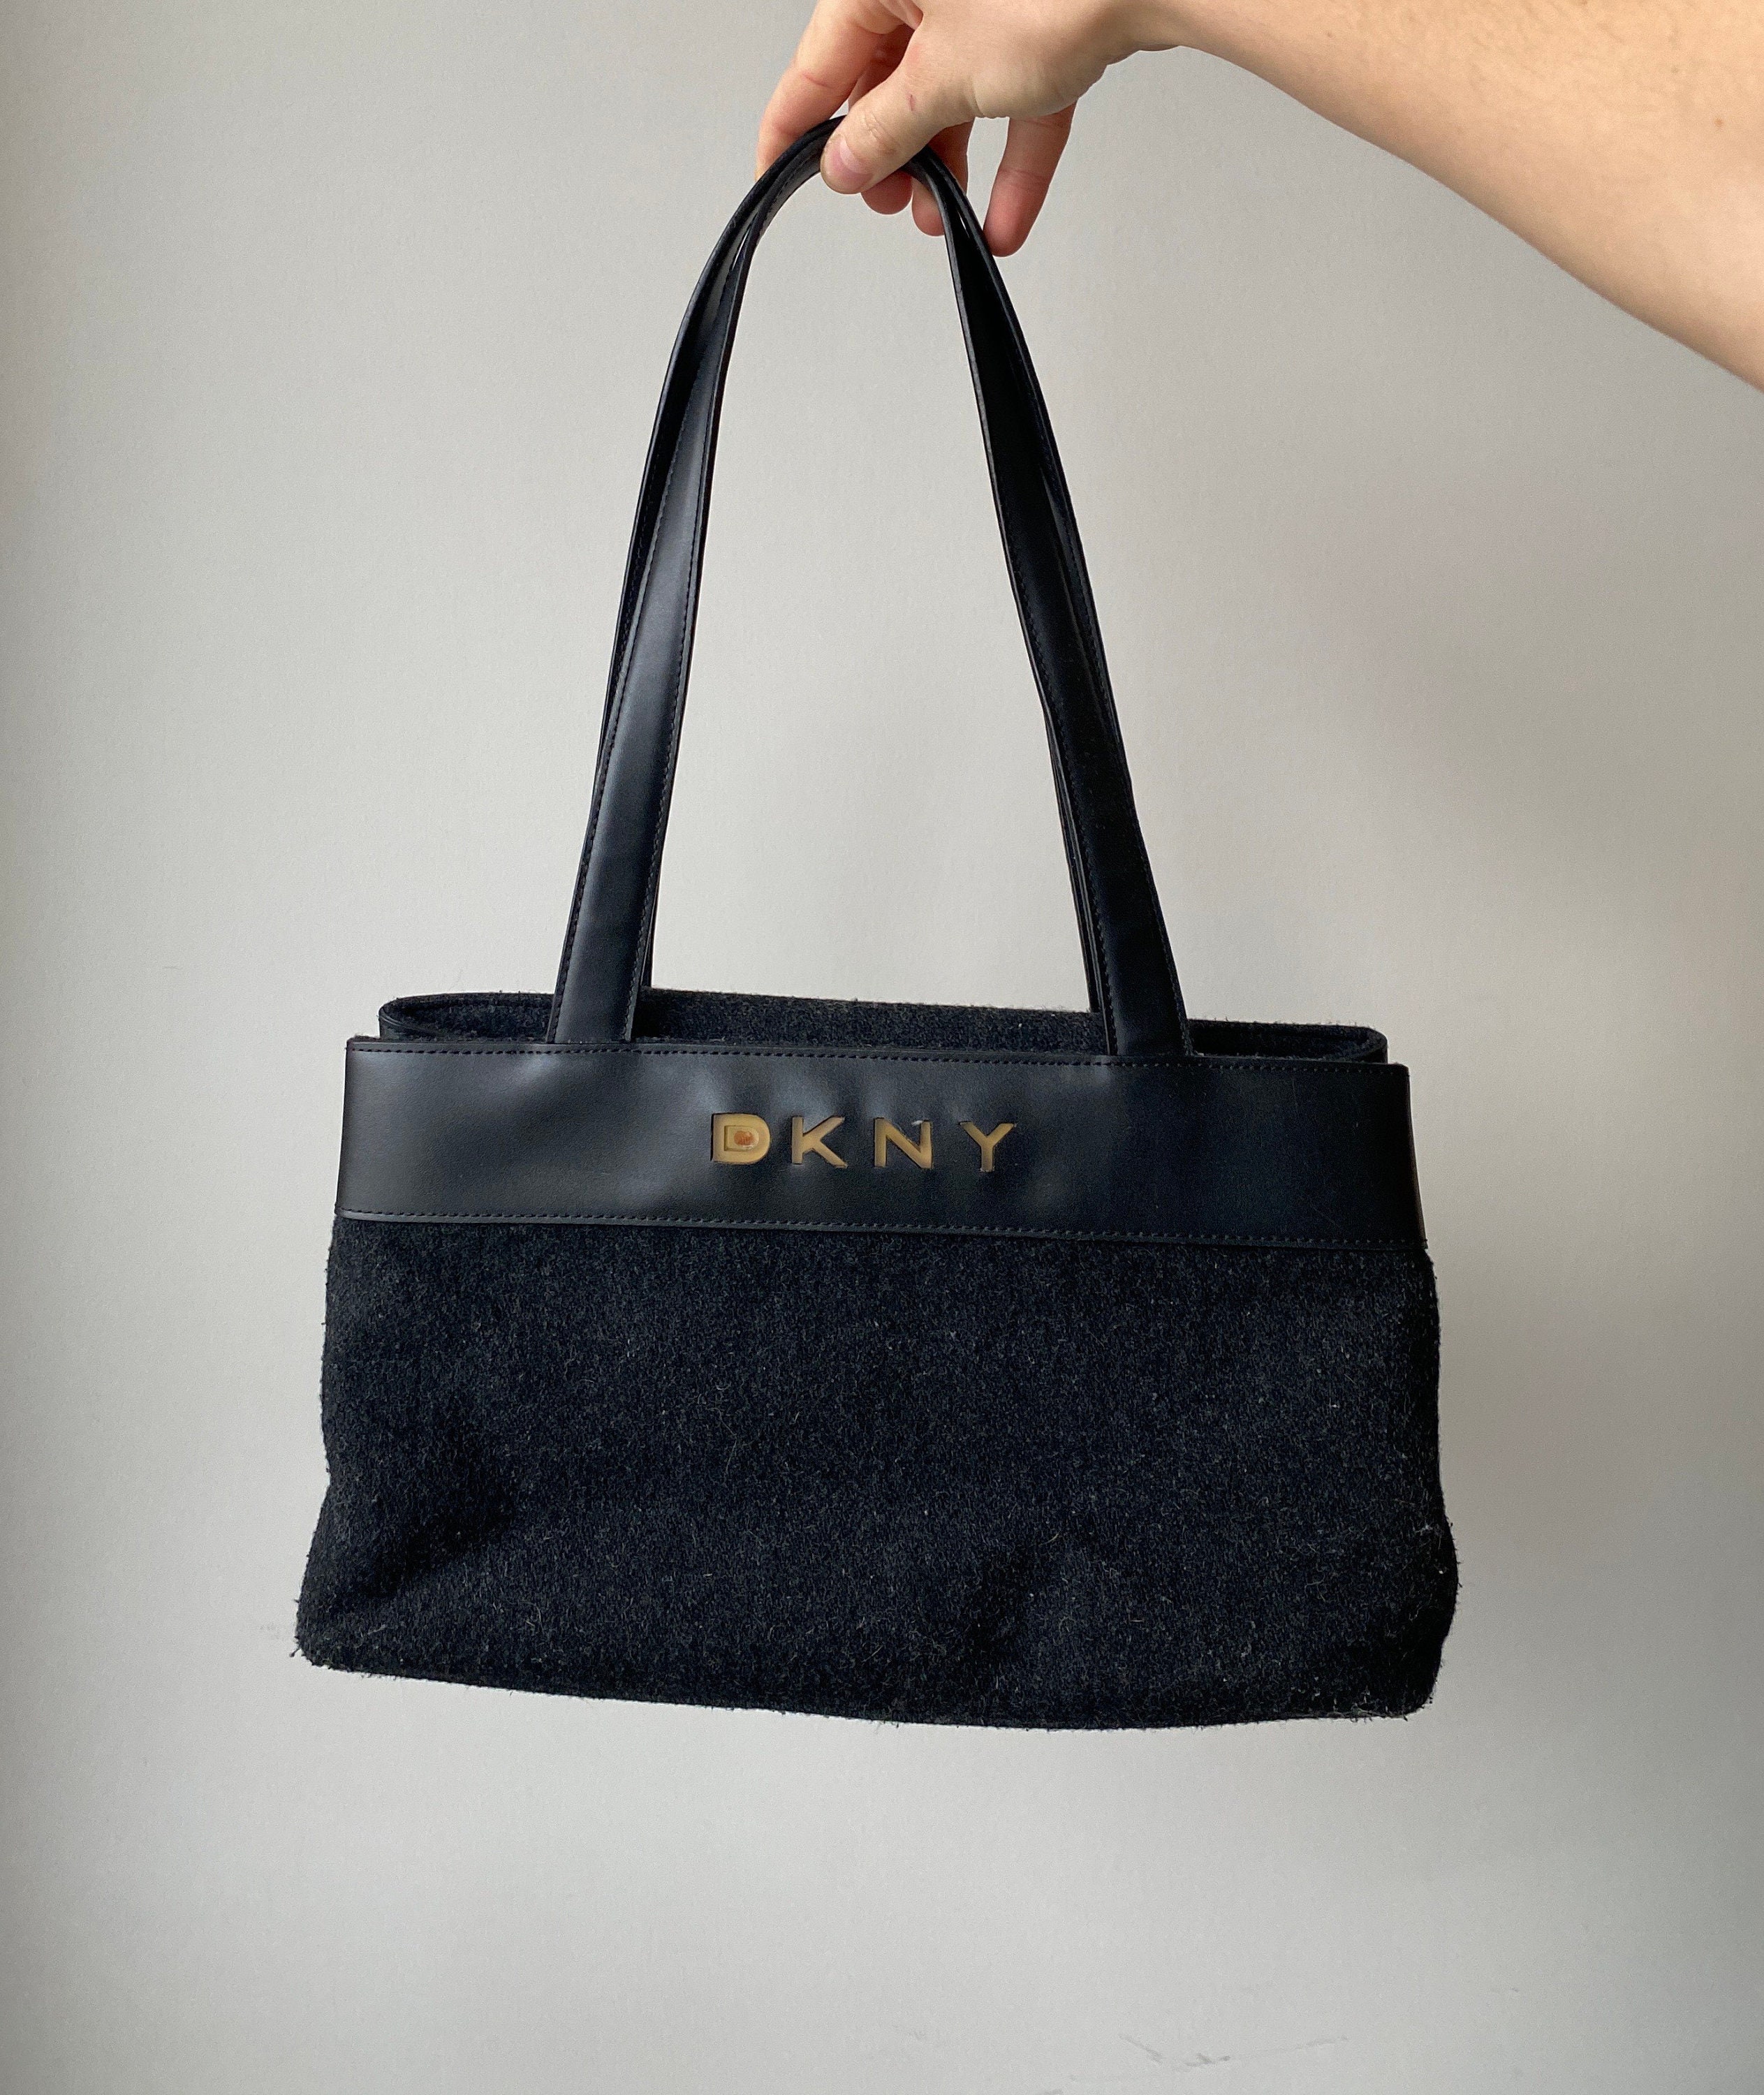 Time Purse - *SOLD* DKNY Soho NY2344 Ladies Watch Cash Price: PHP3,200  Installment/Paypal Price: PHP3,500 No box. No tags. Will ship in a gift  box. Brand new. Guaranteed authentic! Please send us